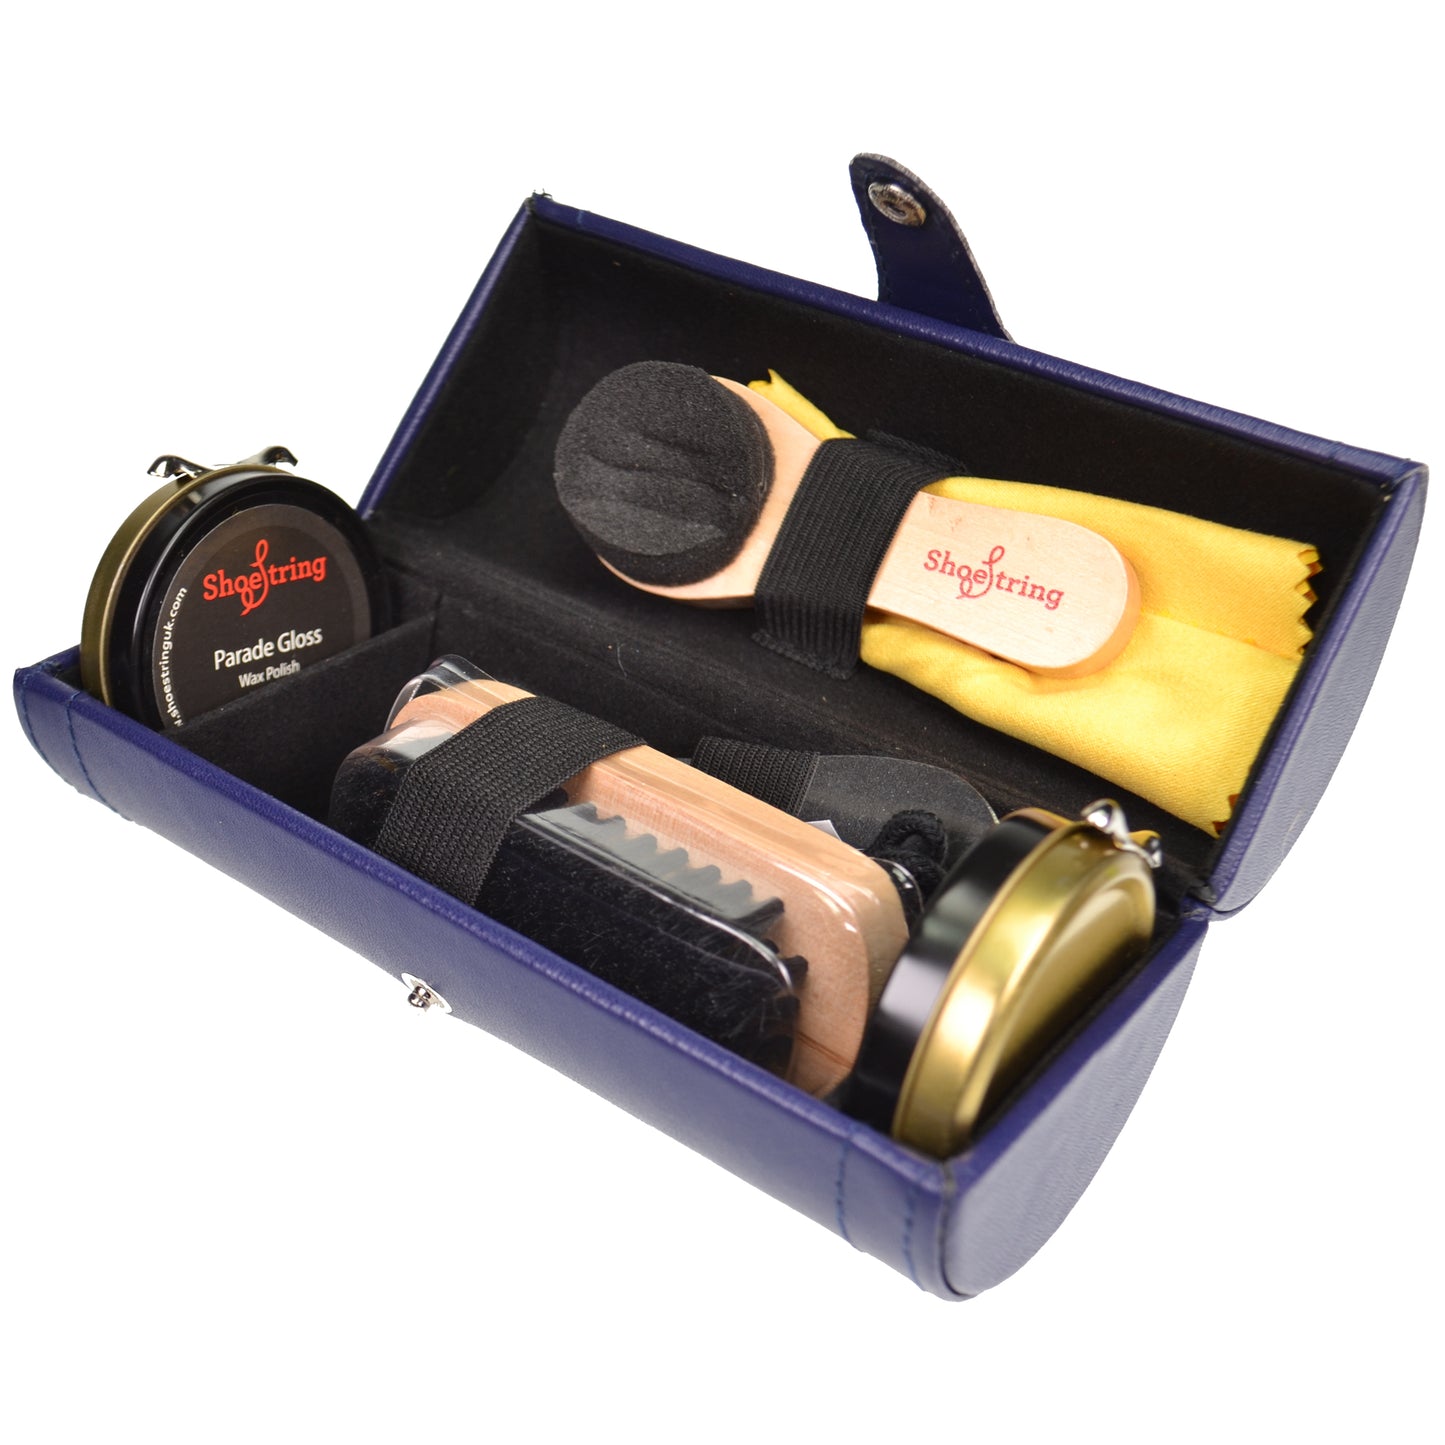 Shoe Cleaning Kit - Barrel Shaped Leather Style Shoe Cleaning Kit with Contents